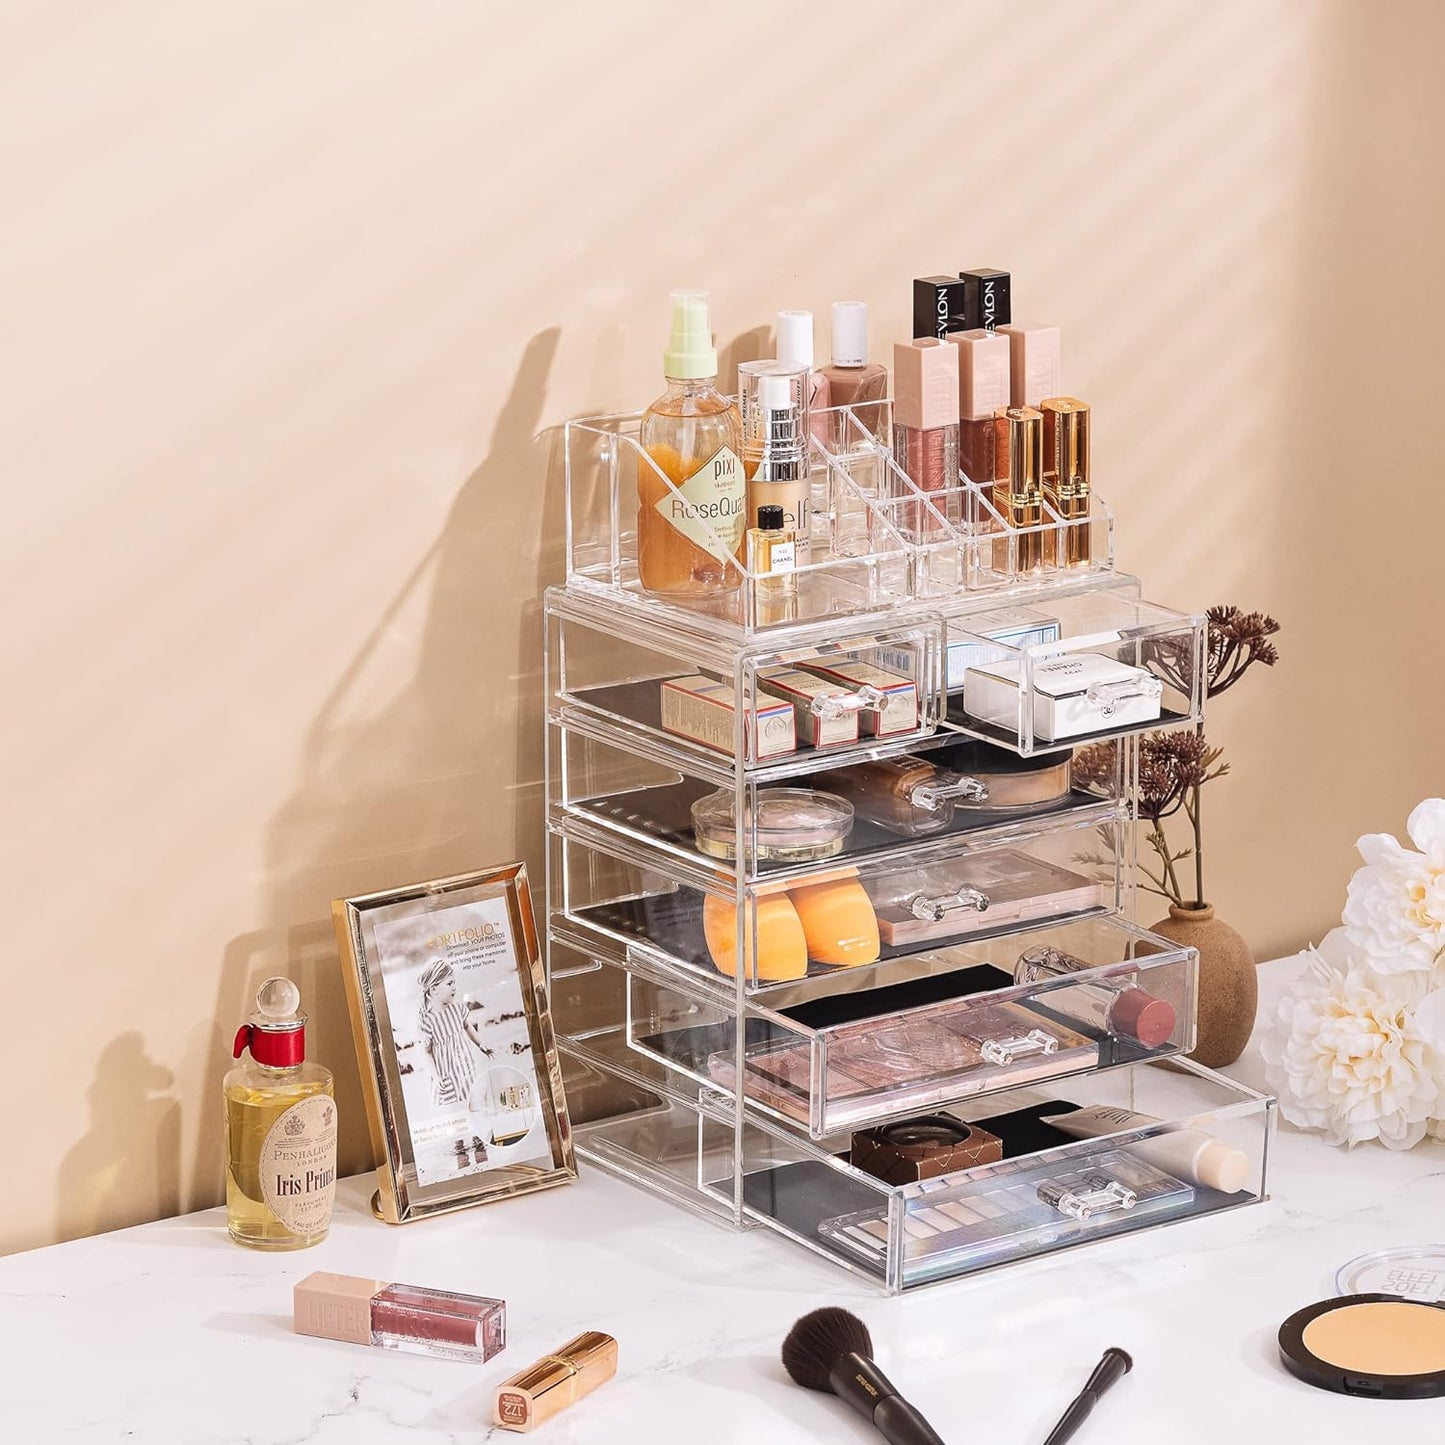 Clear Cosmetic Makeup Organizer - Make up & Jewelry Storage, Case & Display - Spacious Design - Great Holder for Dresser, Bathroom, Vanity & Countertop (4 Large, 2 Small Drawers)